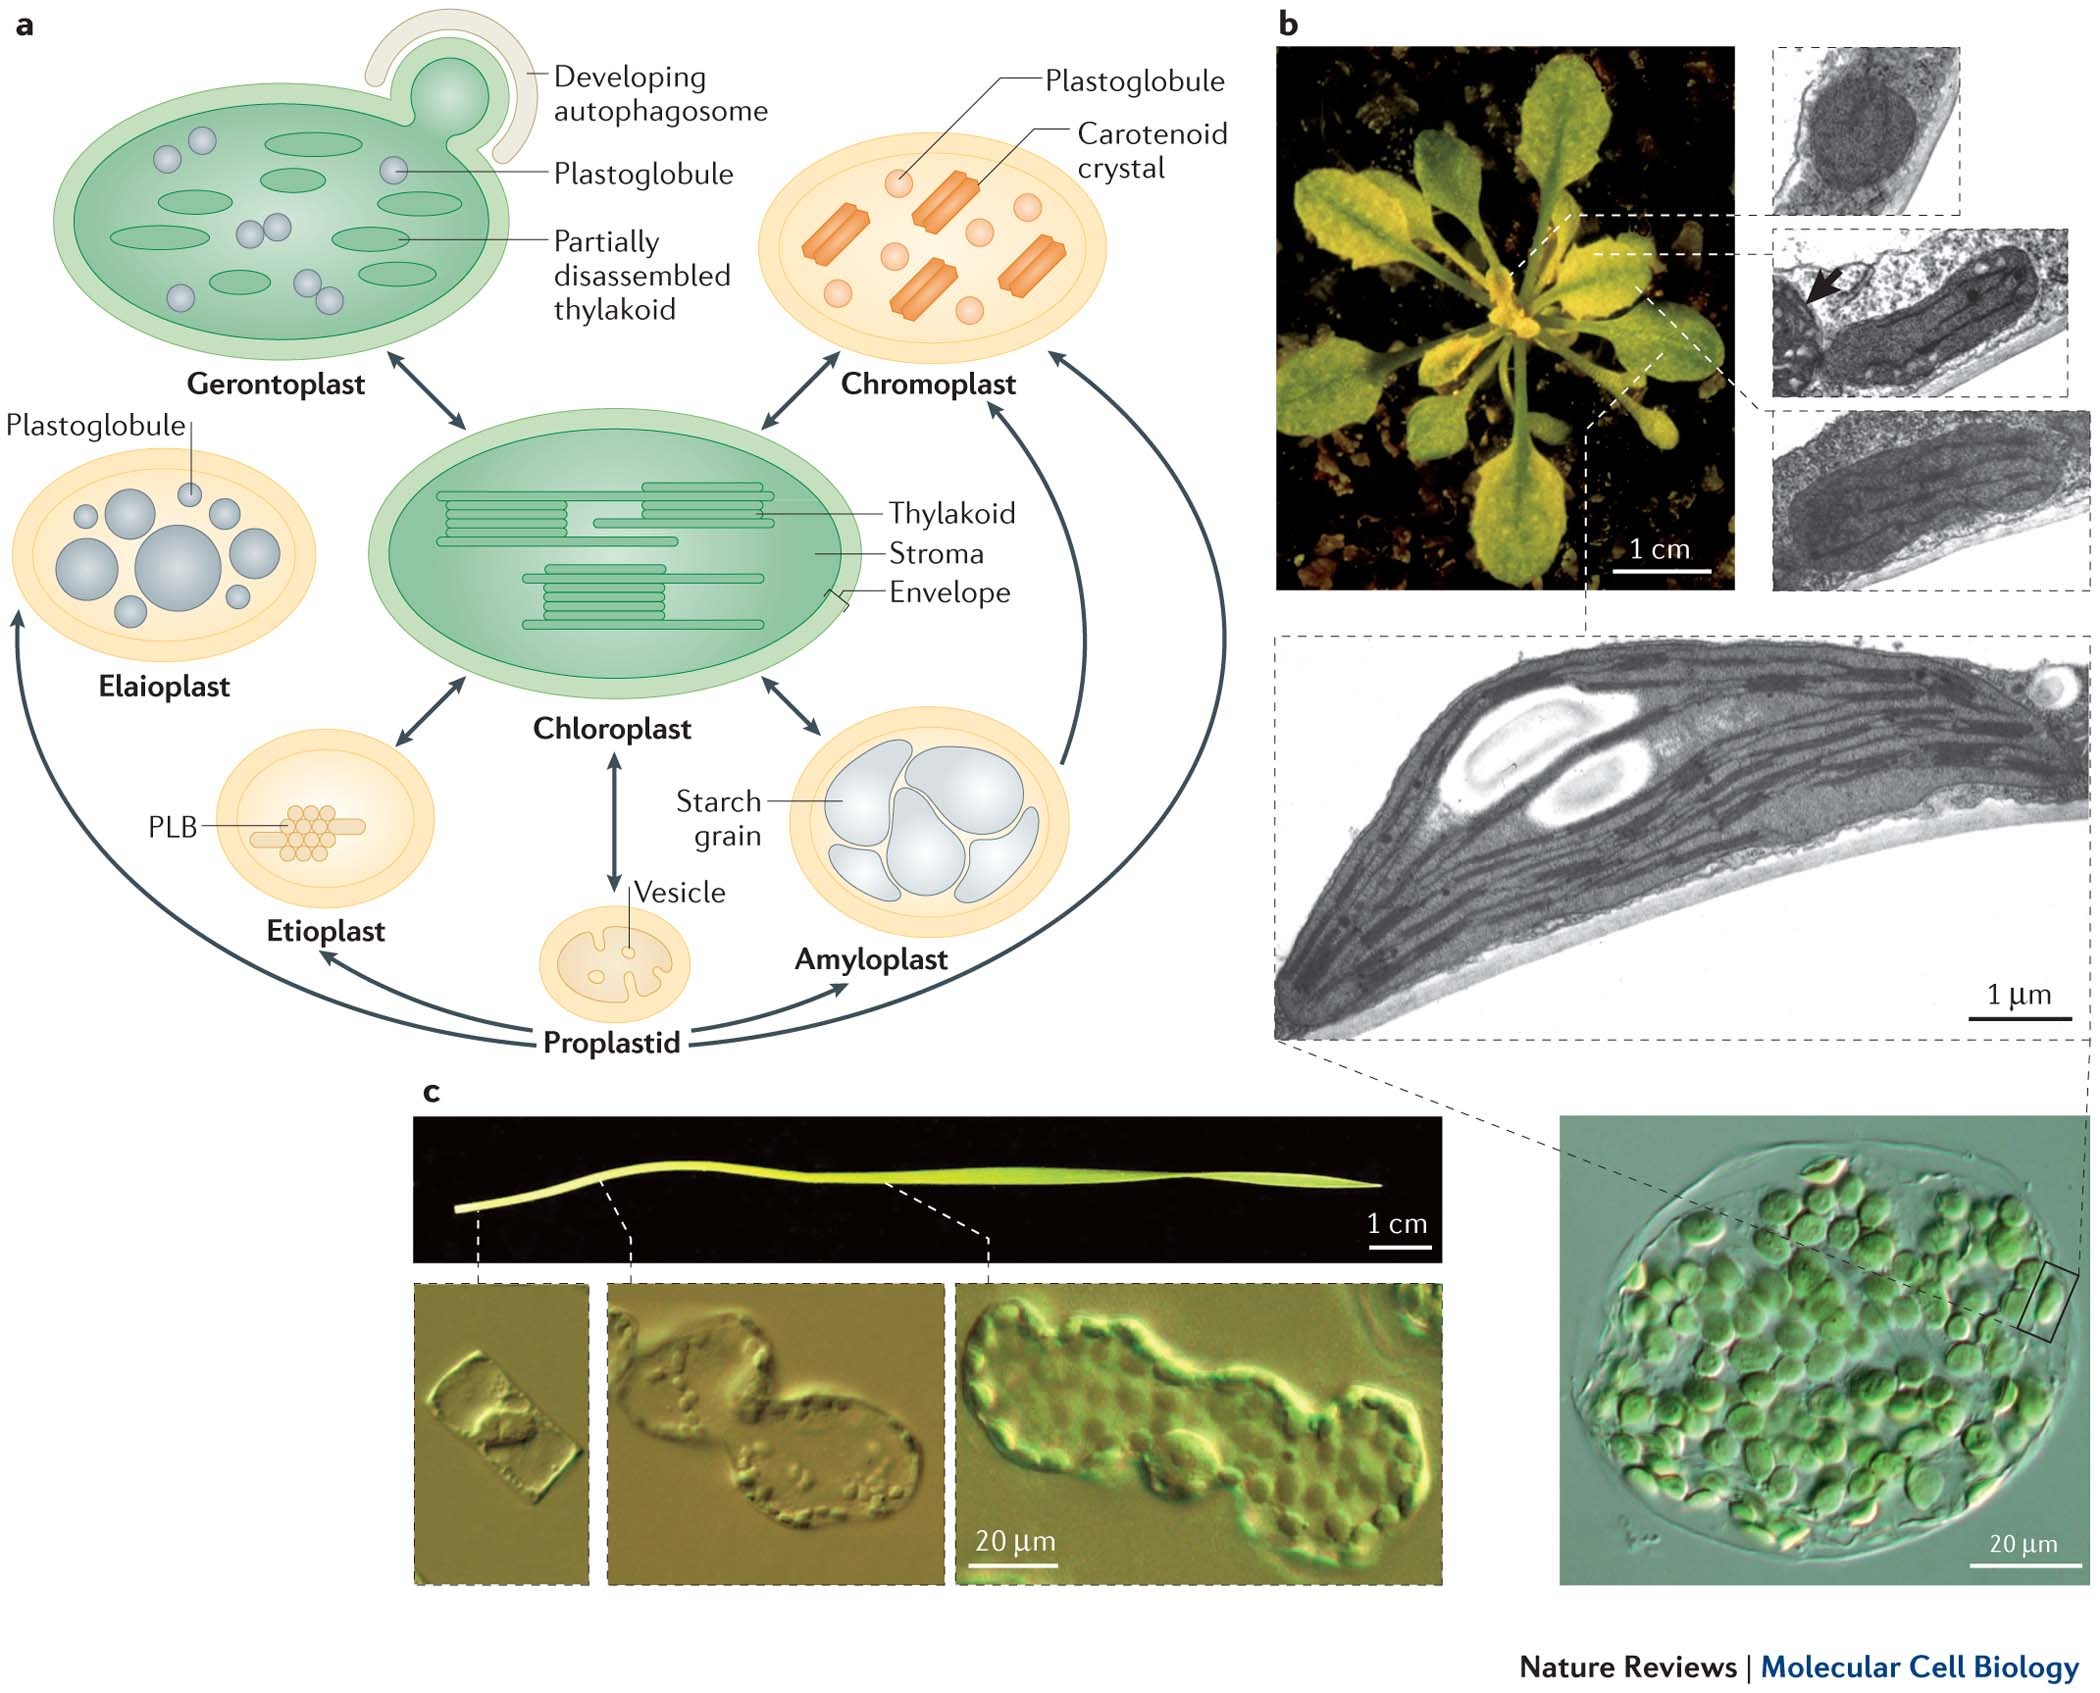 Biogenesis and homeostasis of chloroplasts and other plastids | Nature  Reviews Molecular Cell Biology